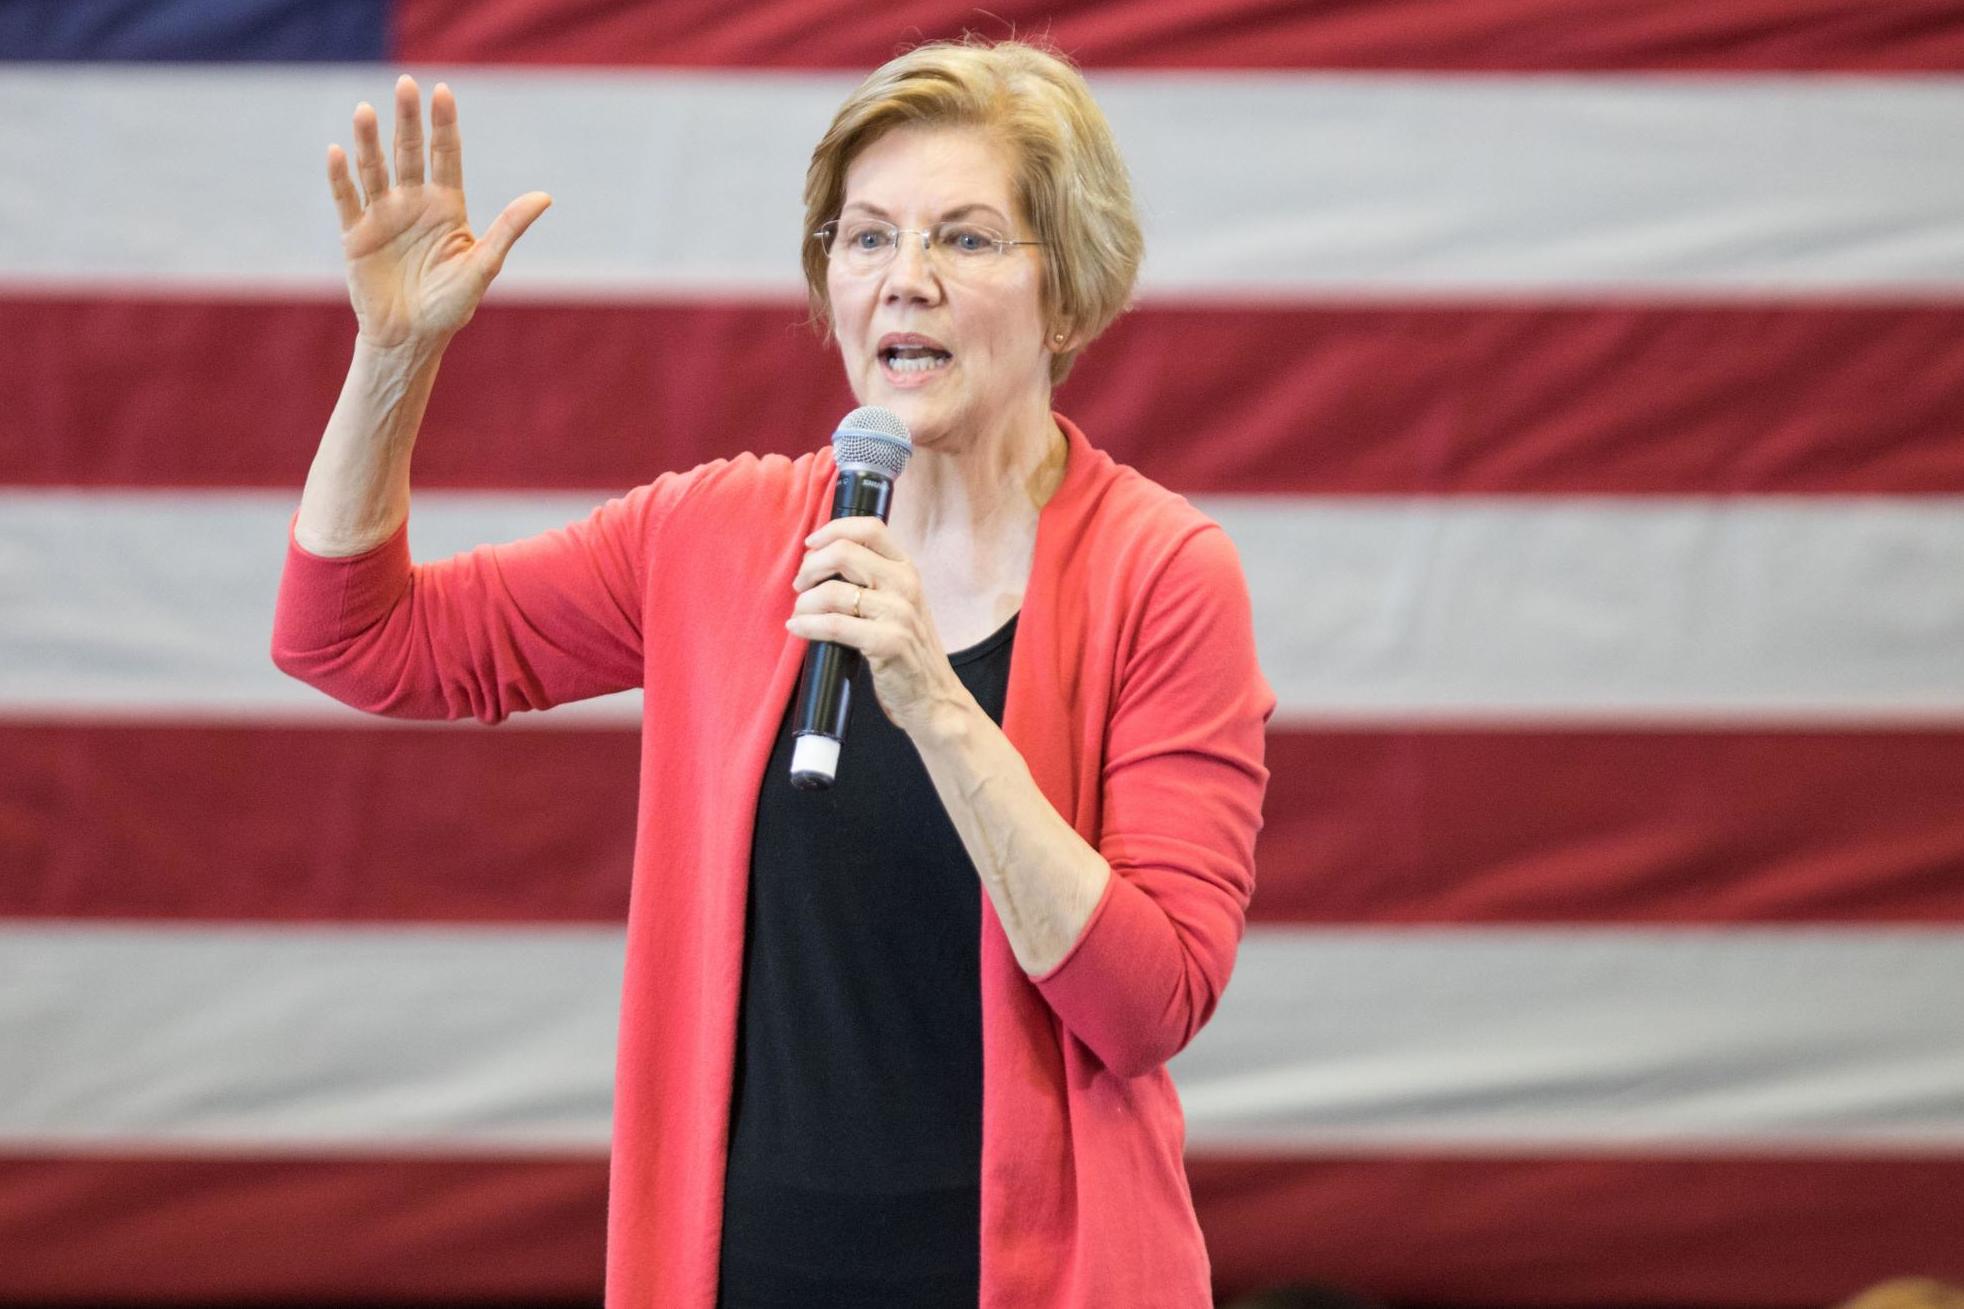 Senator Elizabeth Warren speaks during a New Hampshire organising event for her 2020 presidential exploratory committee at Manchester Community College on 12 January, 2019 in Manchester, New Hampshire.